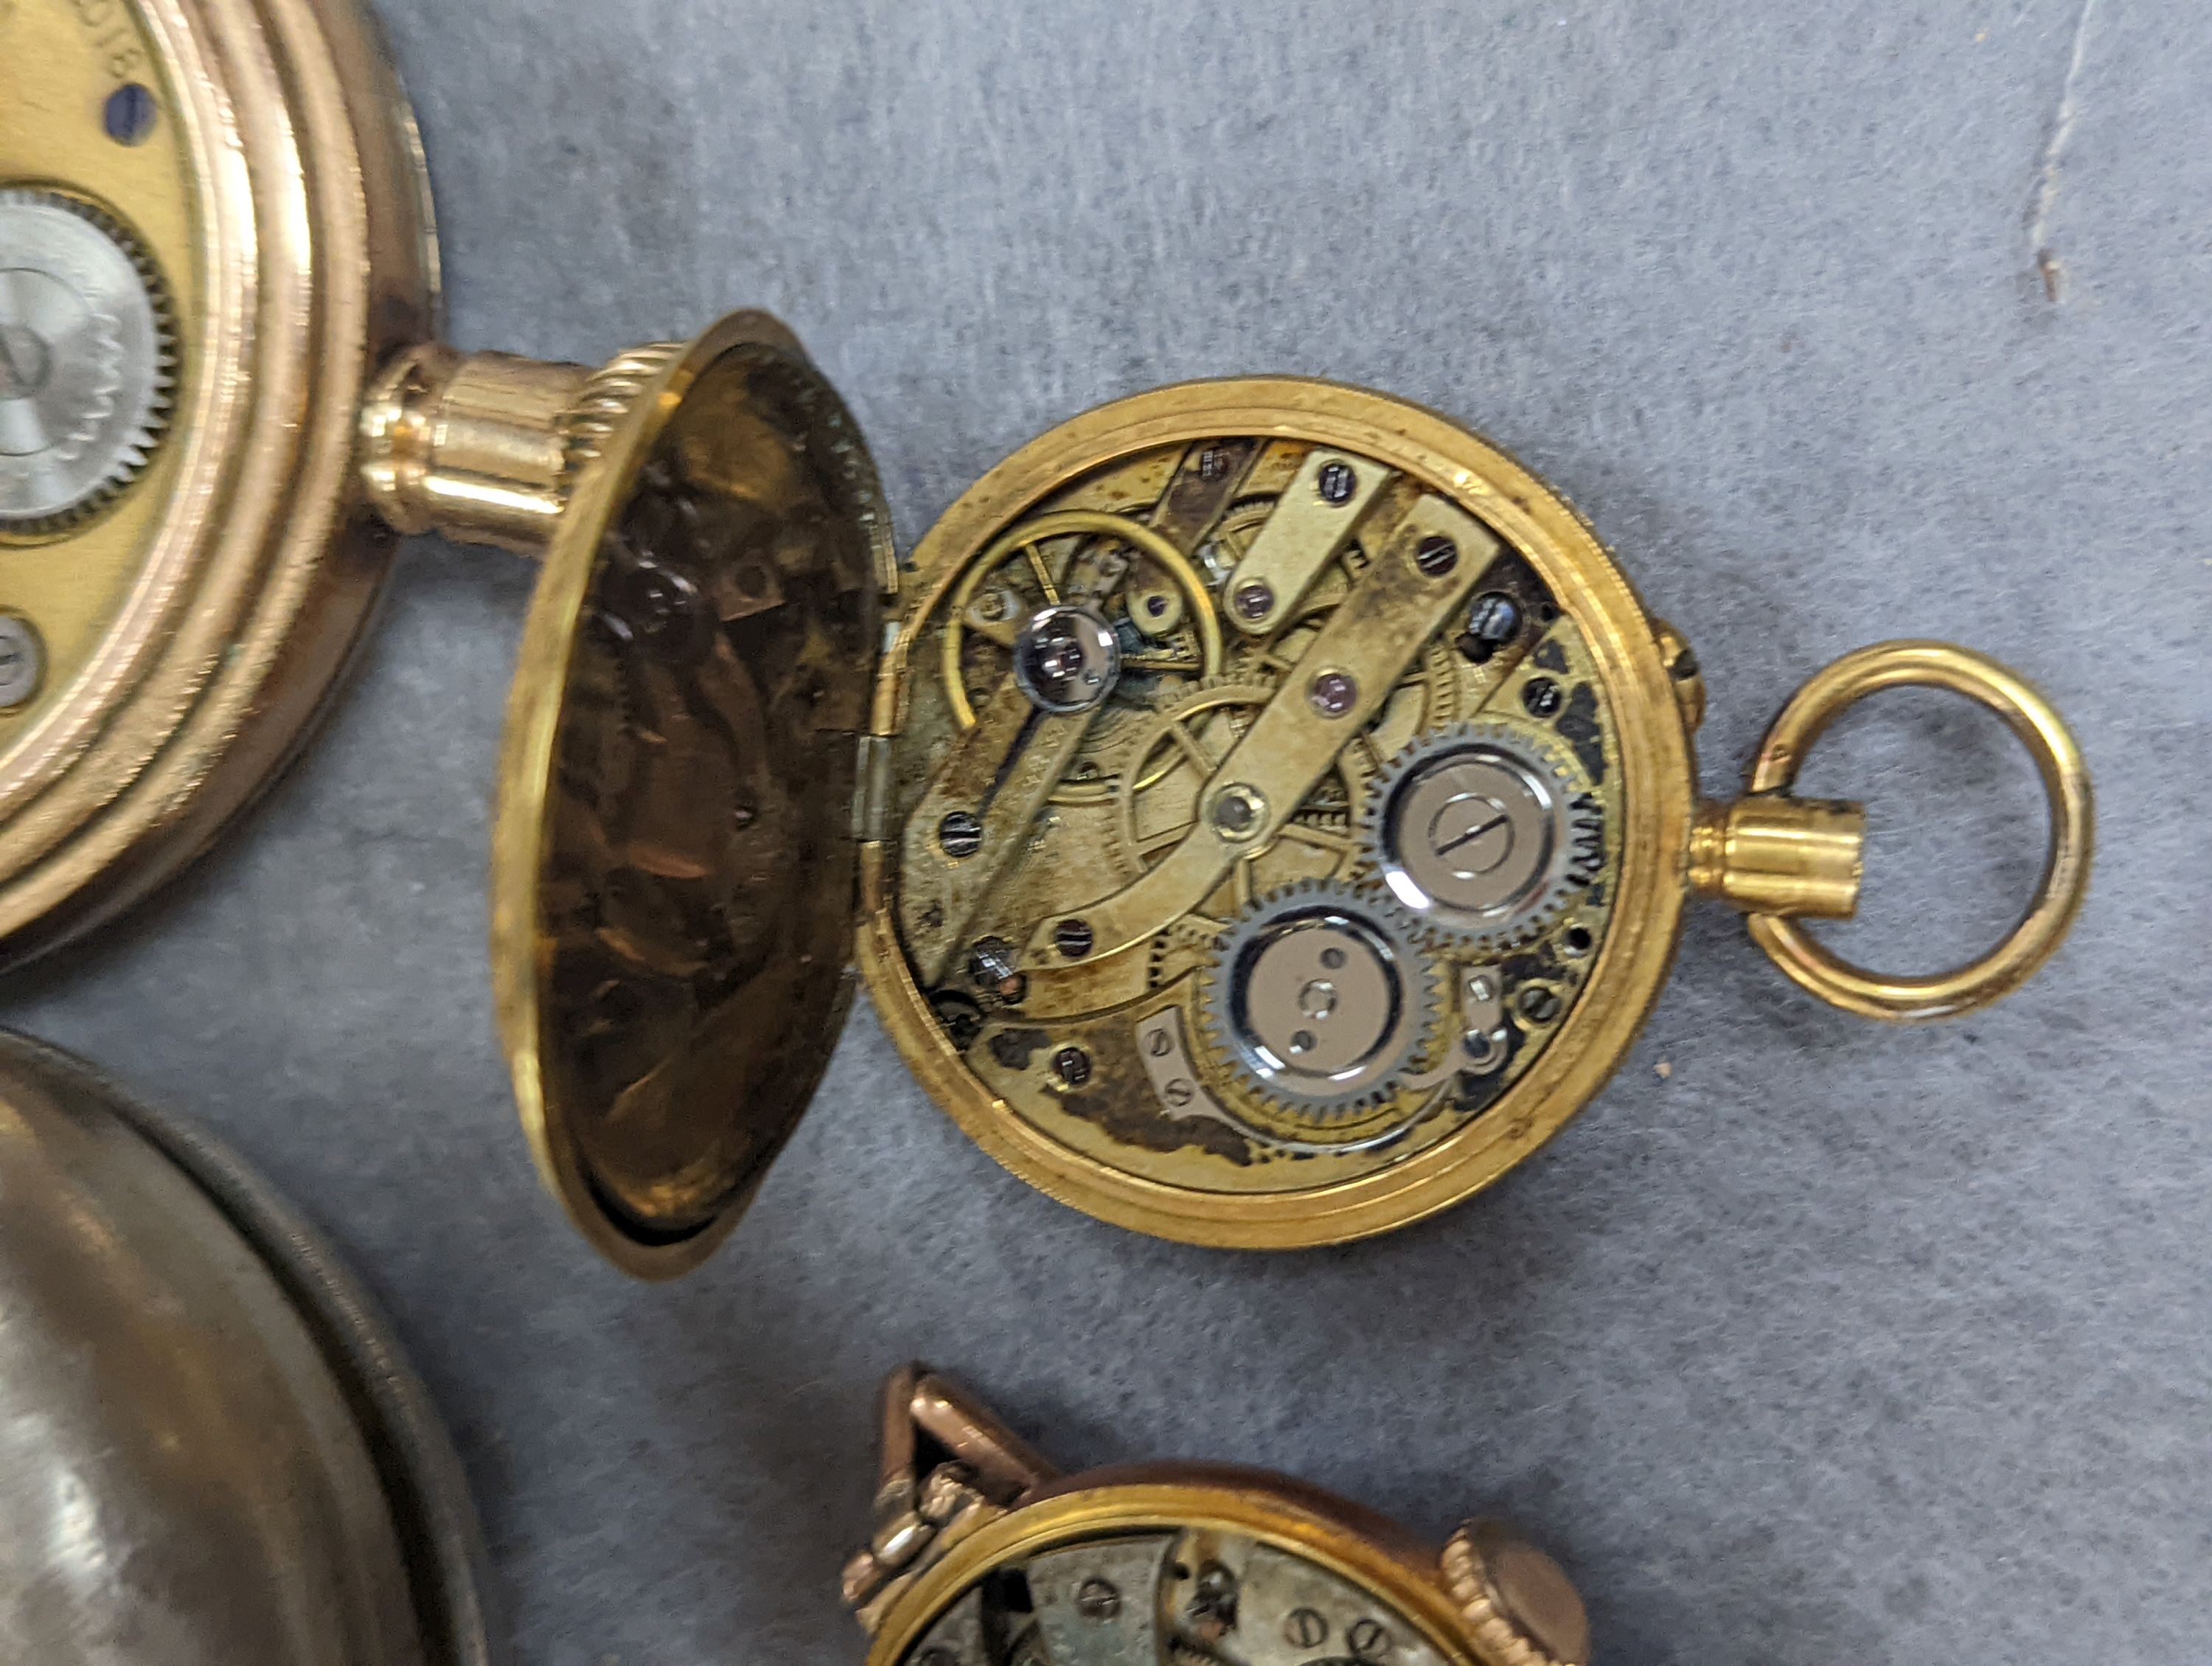 An 18k fob watch(a.f.) gross 20.4 grams, a 9ct wrist watch on a 9ct expanding bracelet, gross 20.7 grams, a gold plated pocket watch, an 800 fob watch and a 19th century silver pair cased verge keywind pocket watch, by J